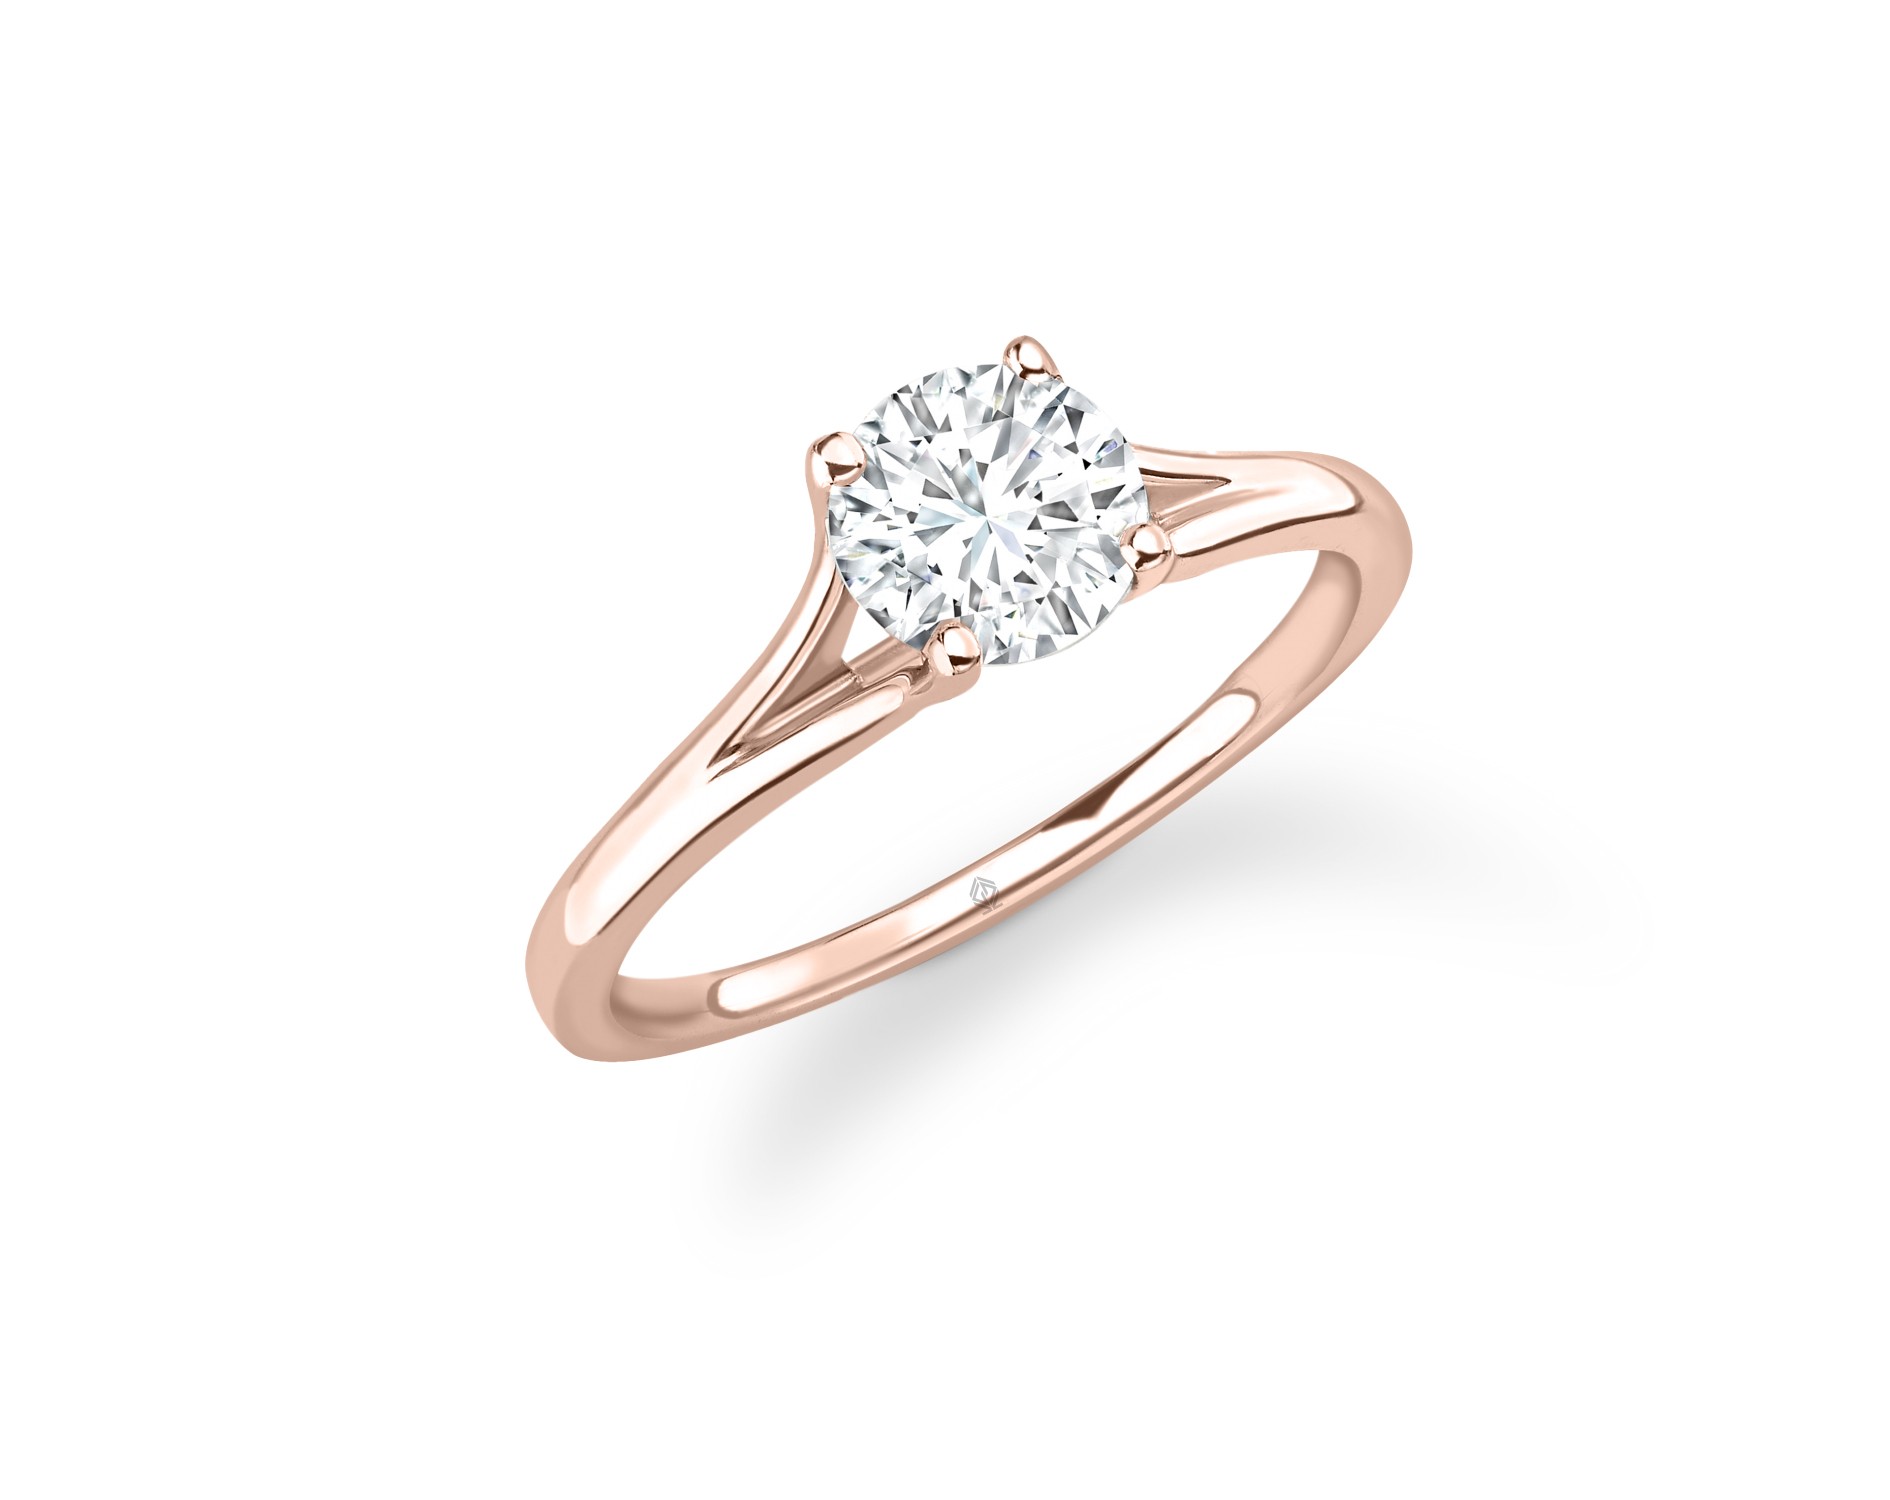 18K ROSE GOLD 4 PRONGS SOLITAIRE ROUND CUT DIAMOND ENGAGEMENT RING WITH SPLIT SHANK